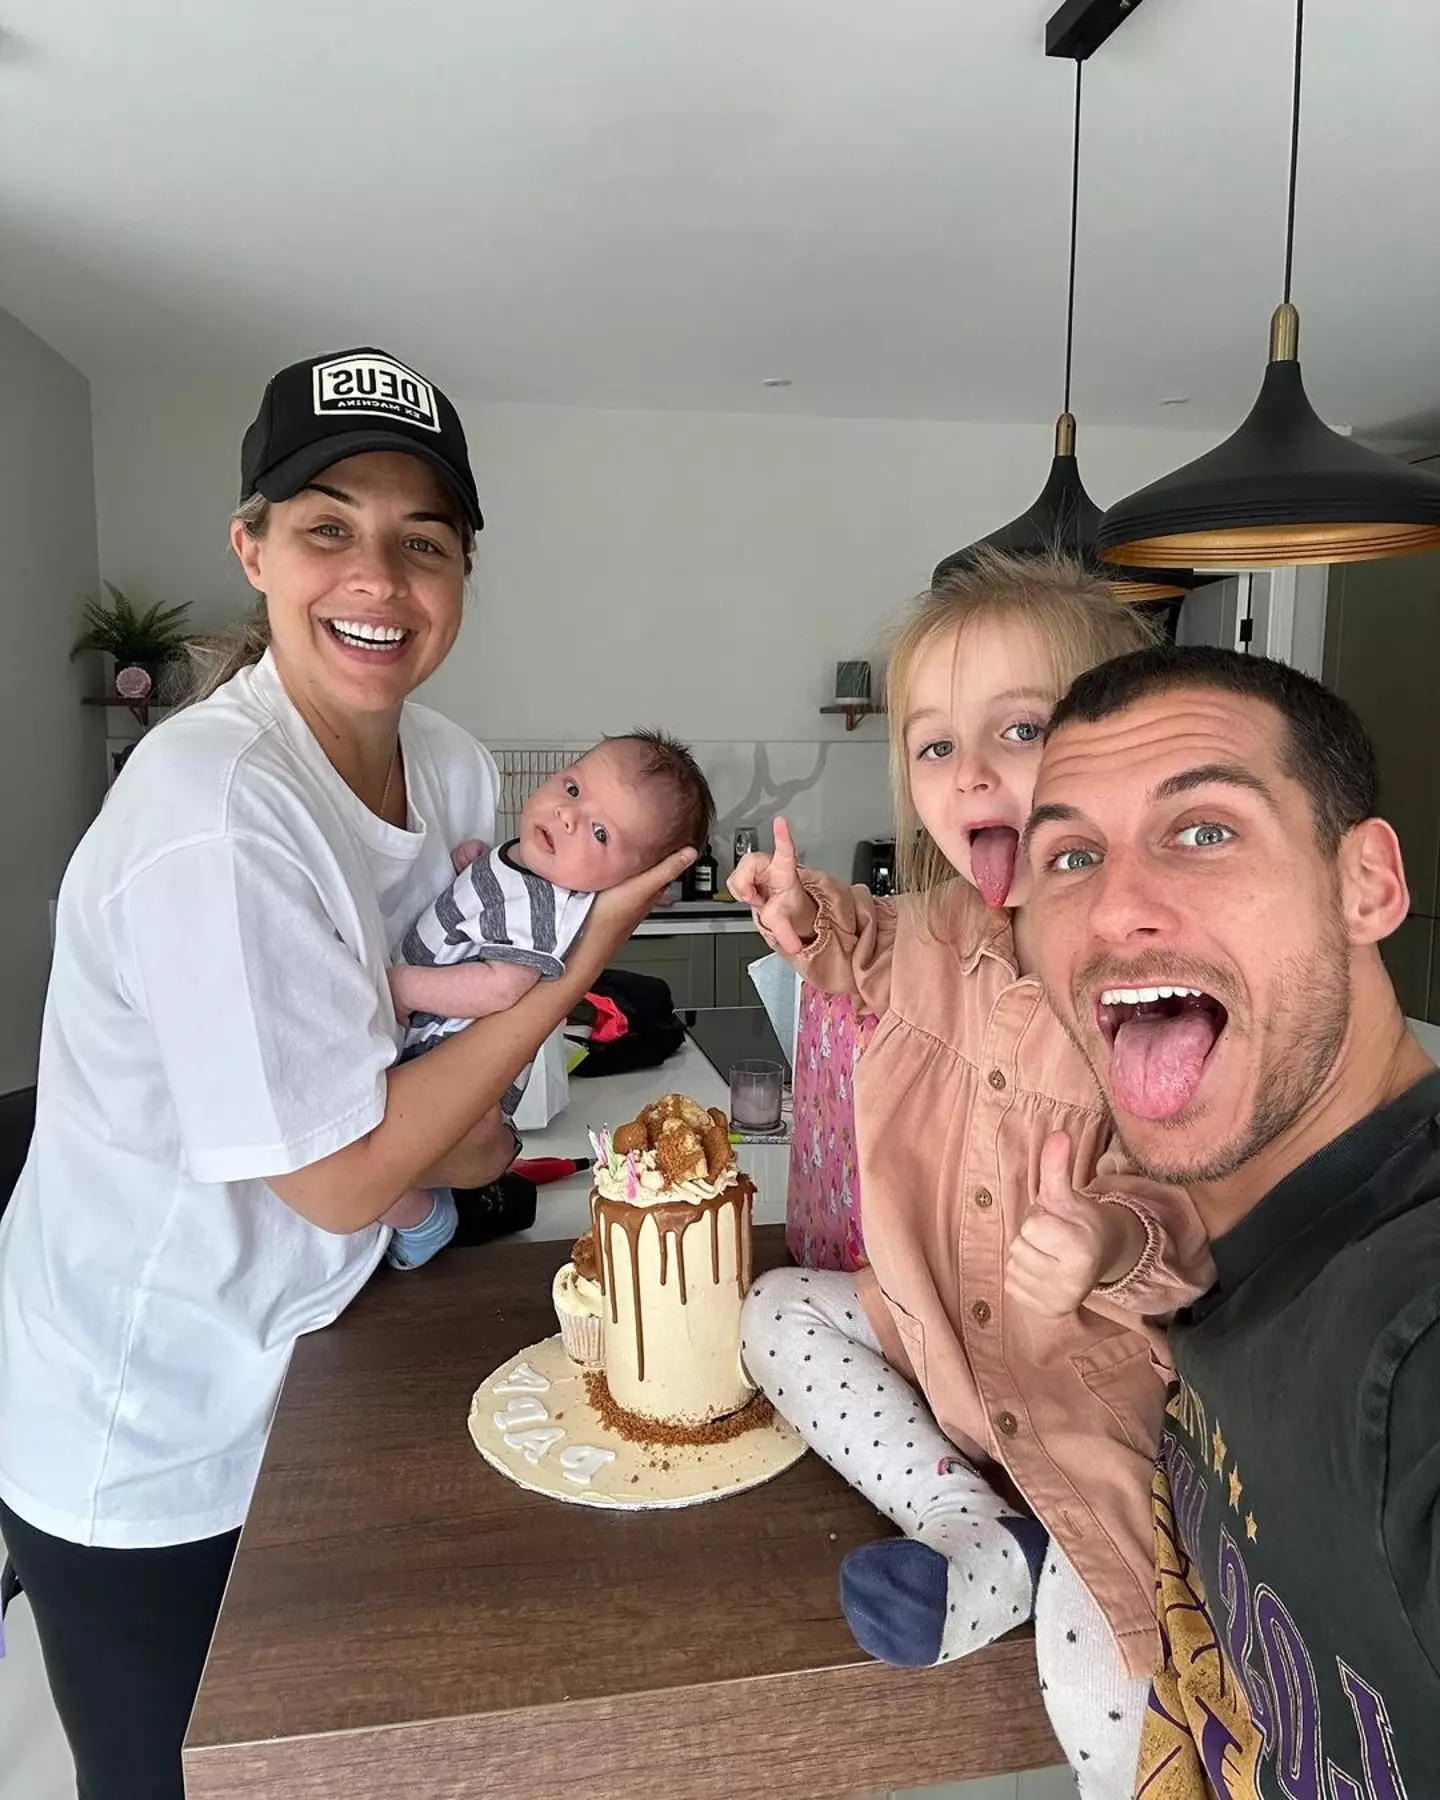 Gemma and Gorka welcomed baby Thiago in July.